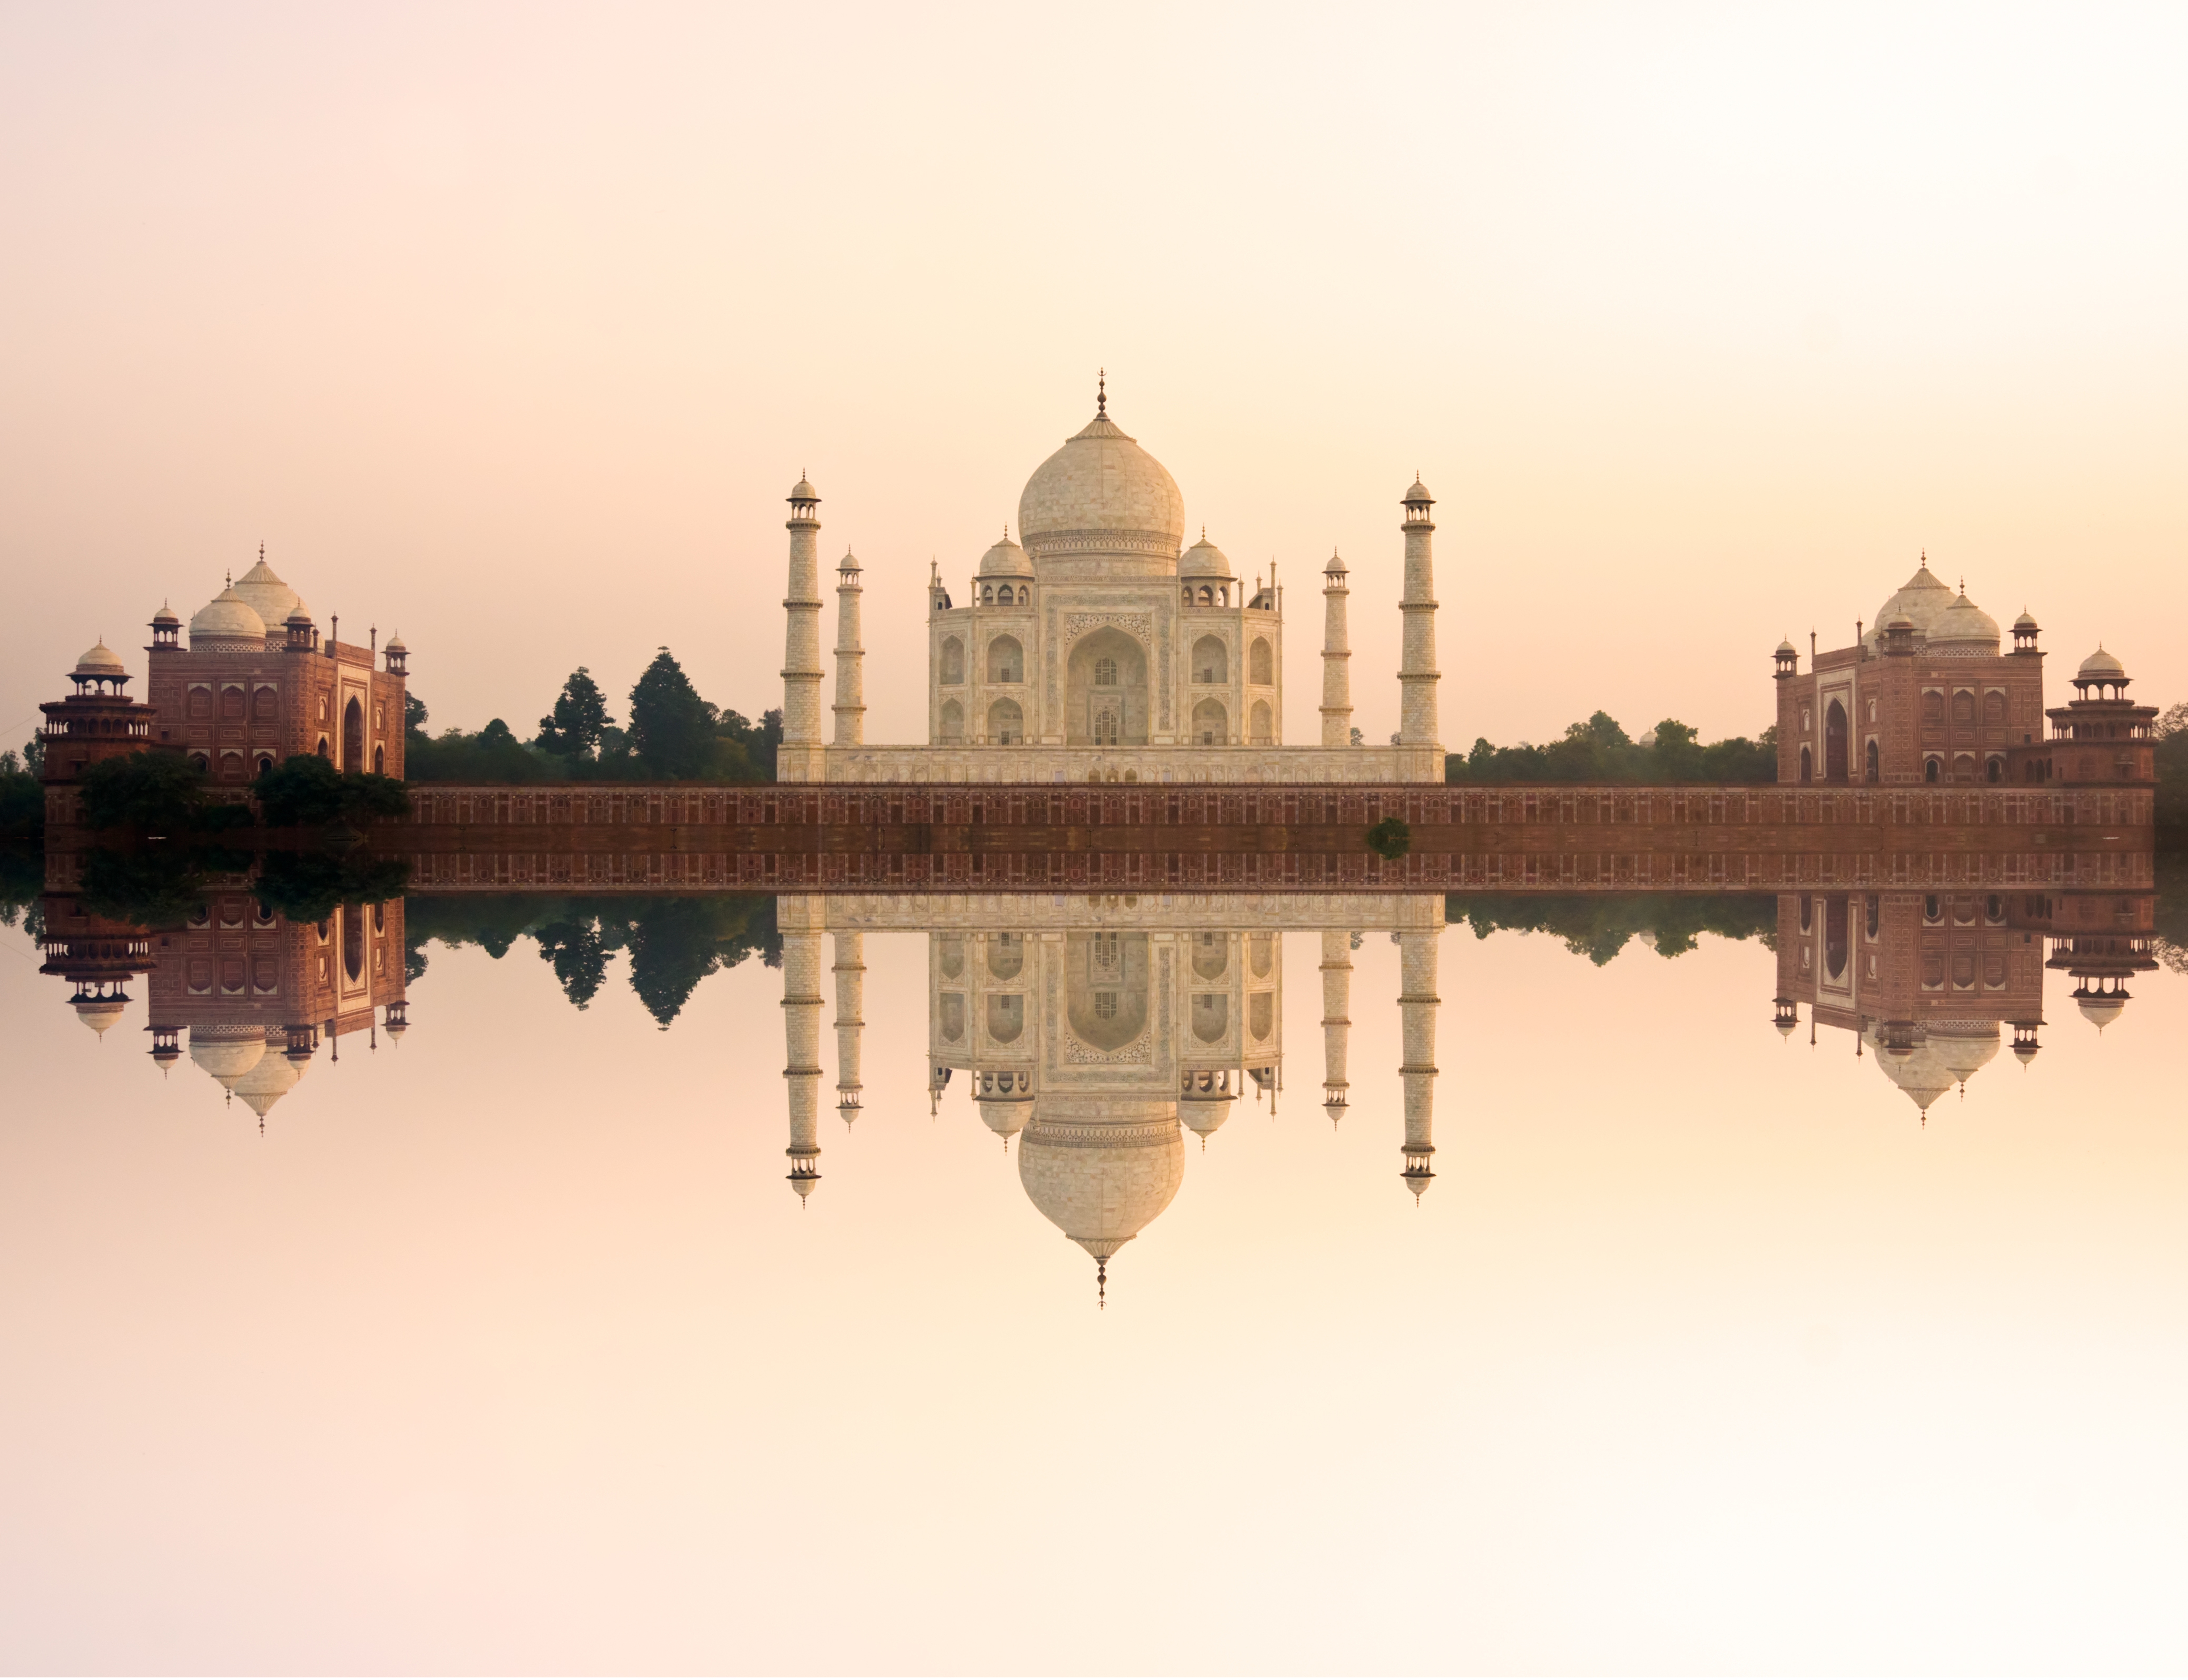 Taj Mahal Building Reflection Water Dome Monument Architecture India 6565x5040